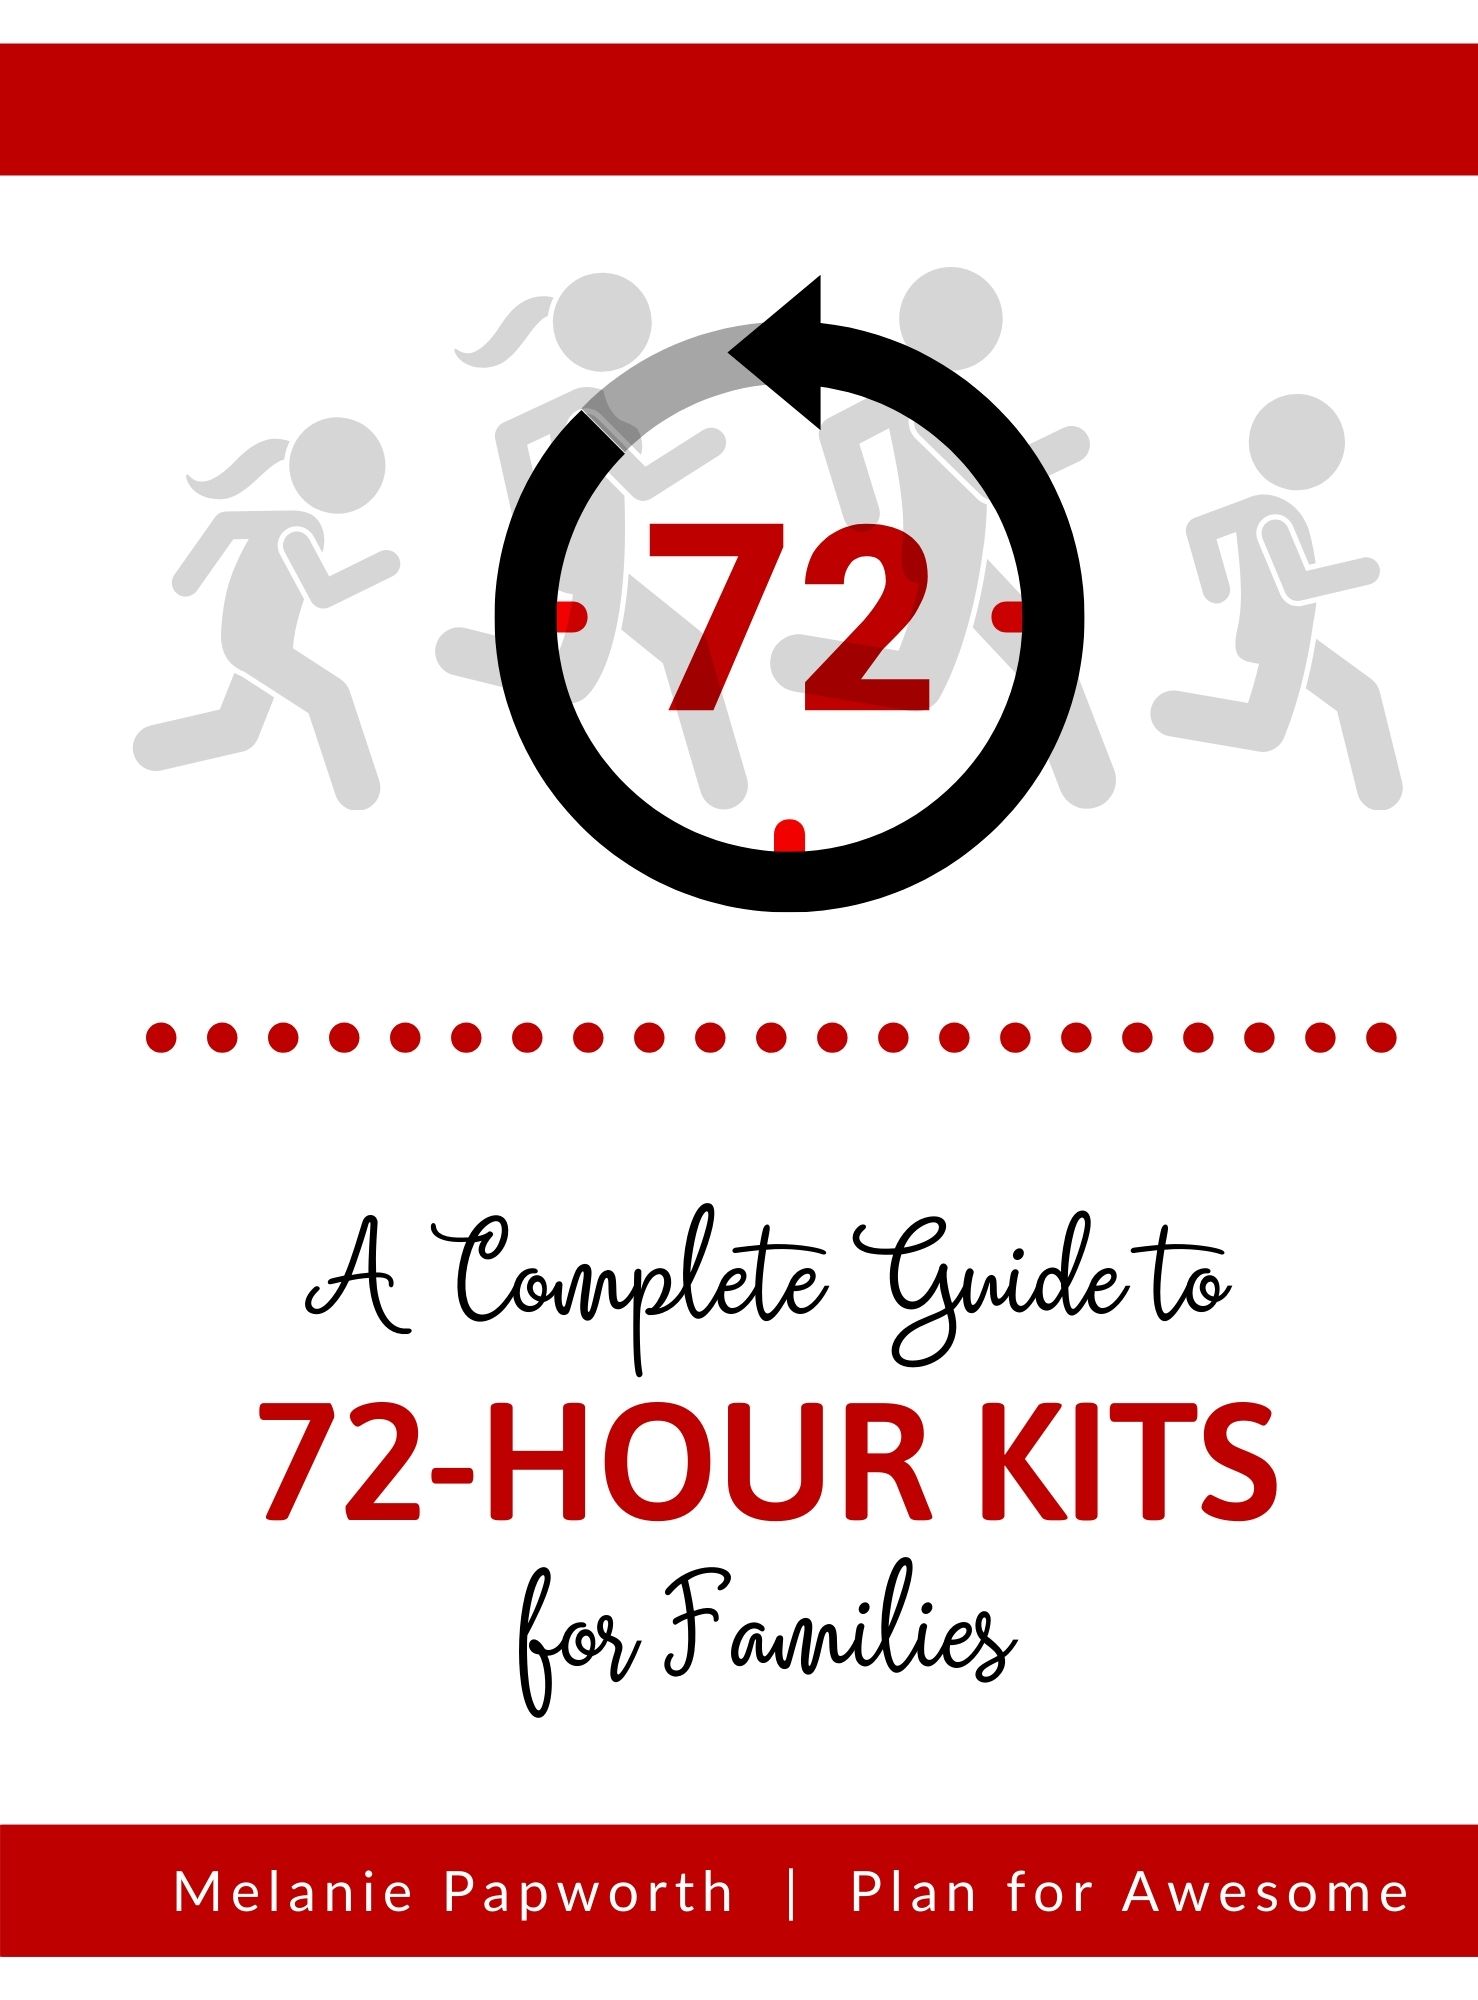 72-hour kits for families cover sheet.